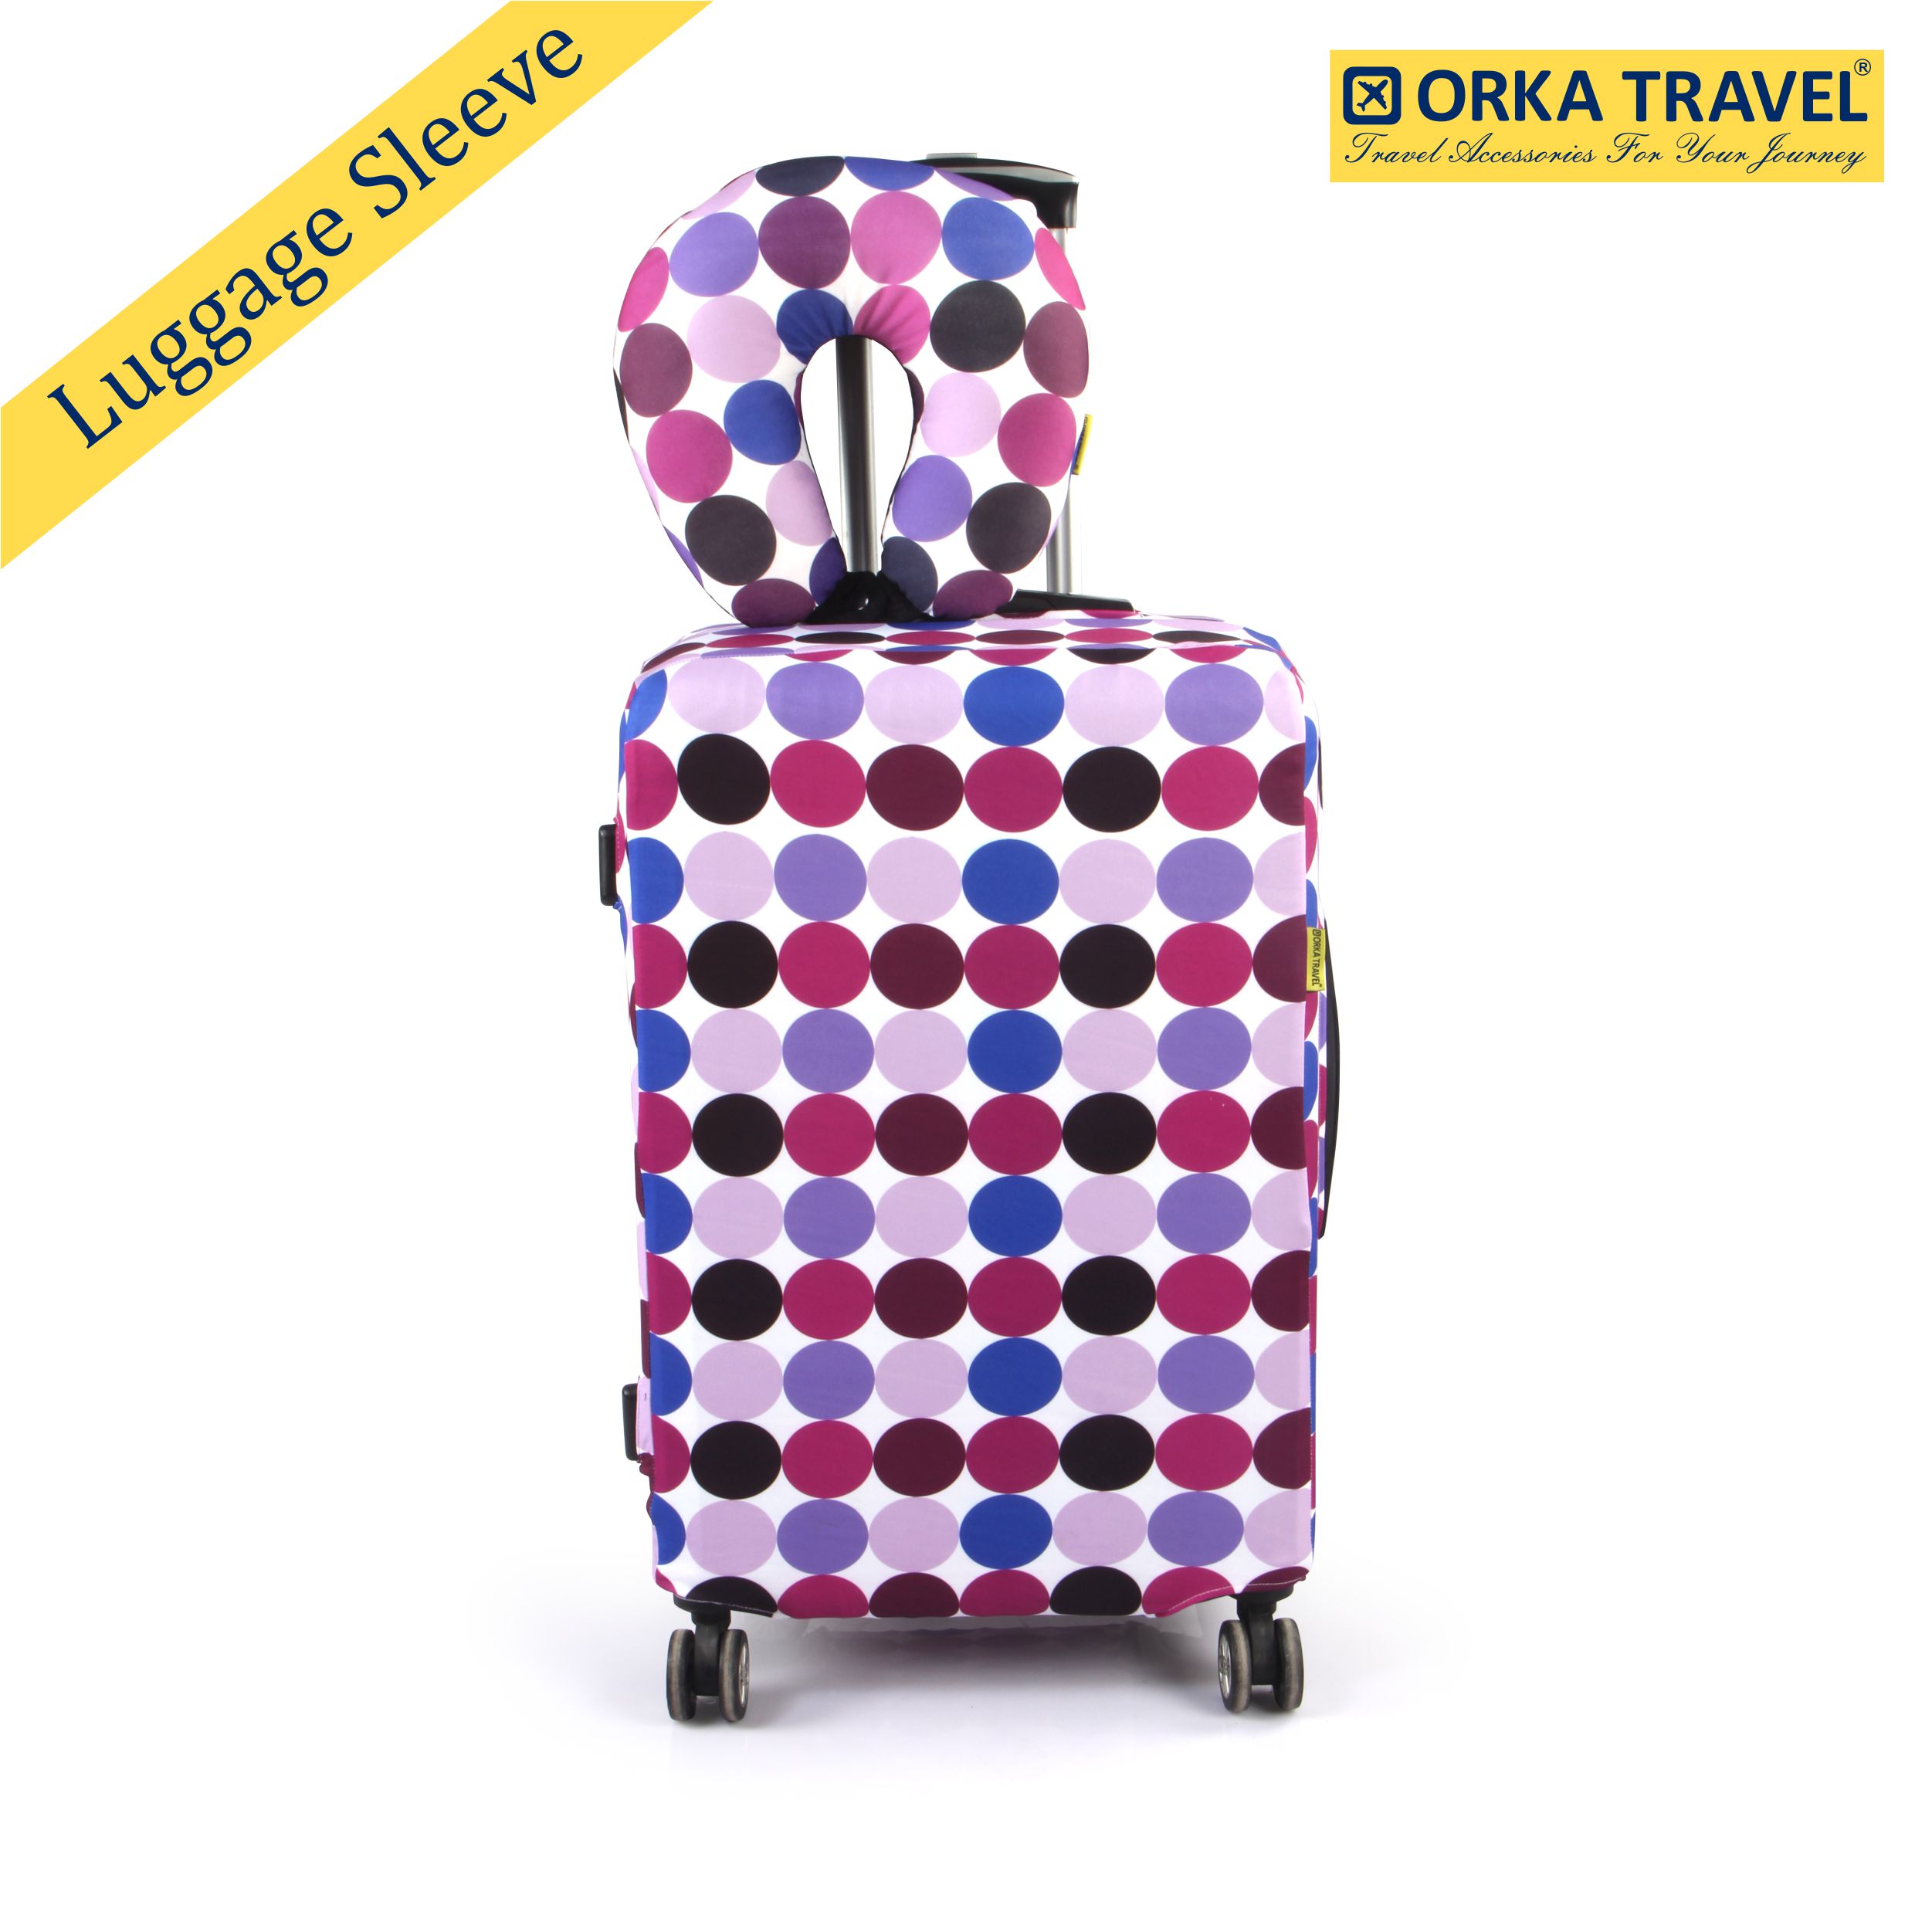 ORKA TRAVEL Polka Dots Theme LUGGAGE PROTECTOR WITH MATCHING U NECK PILLOW LUGGAGE COVER  